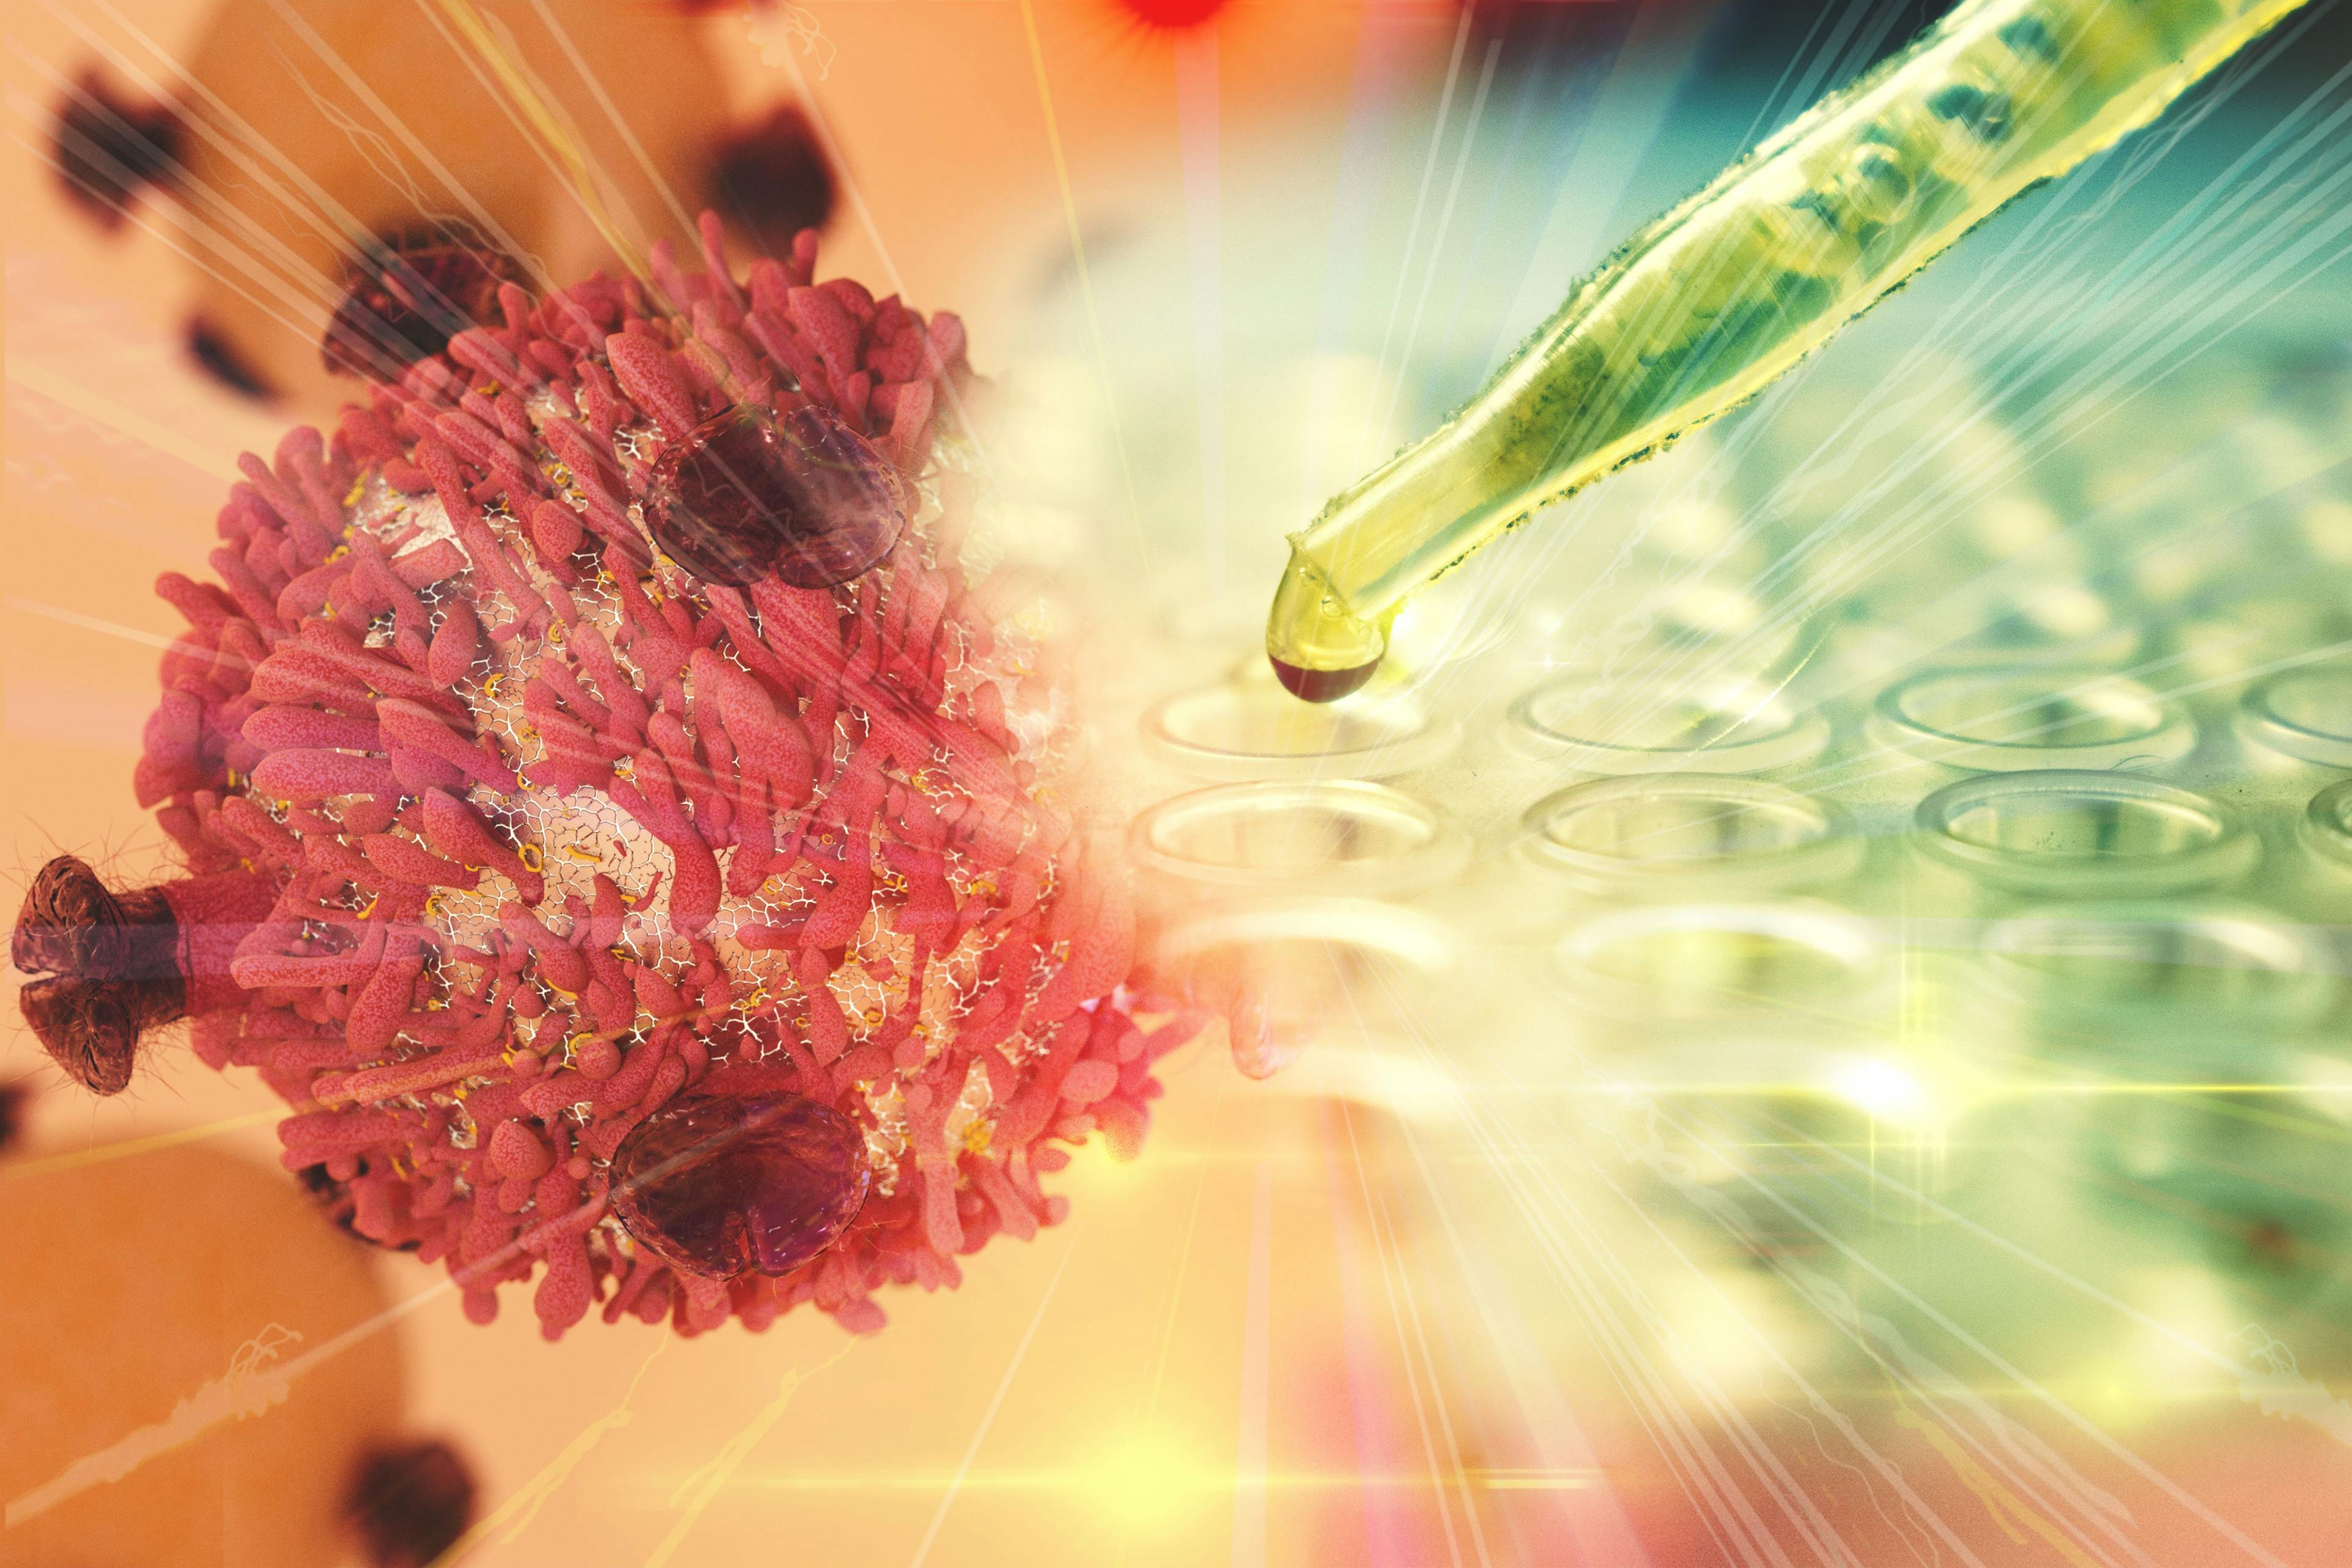 Personalized Cancer Vaccine with Atezolizumab Shows Promise in Advanced Solid Tumors